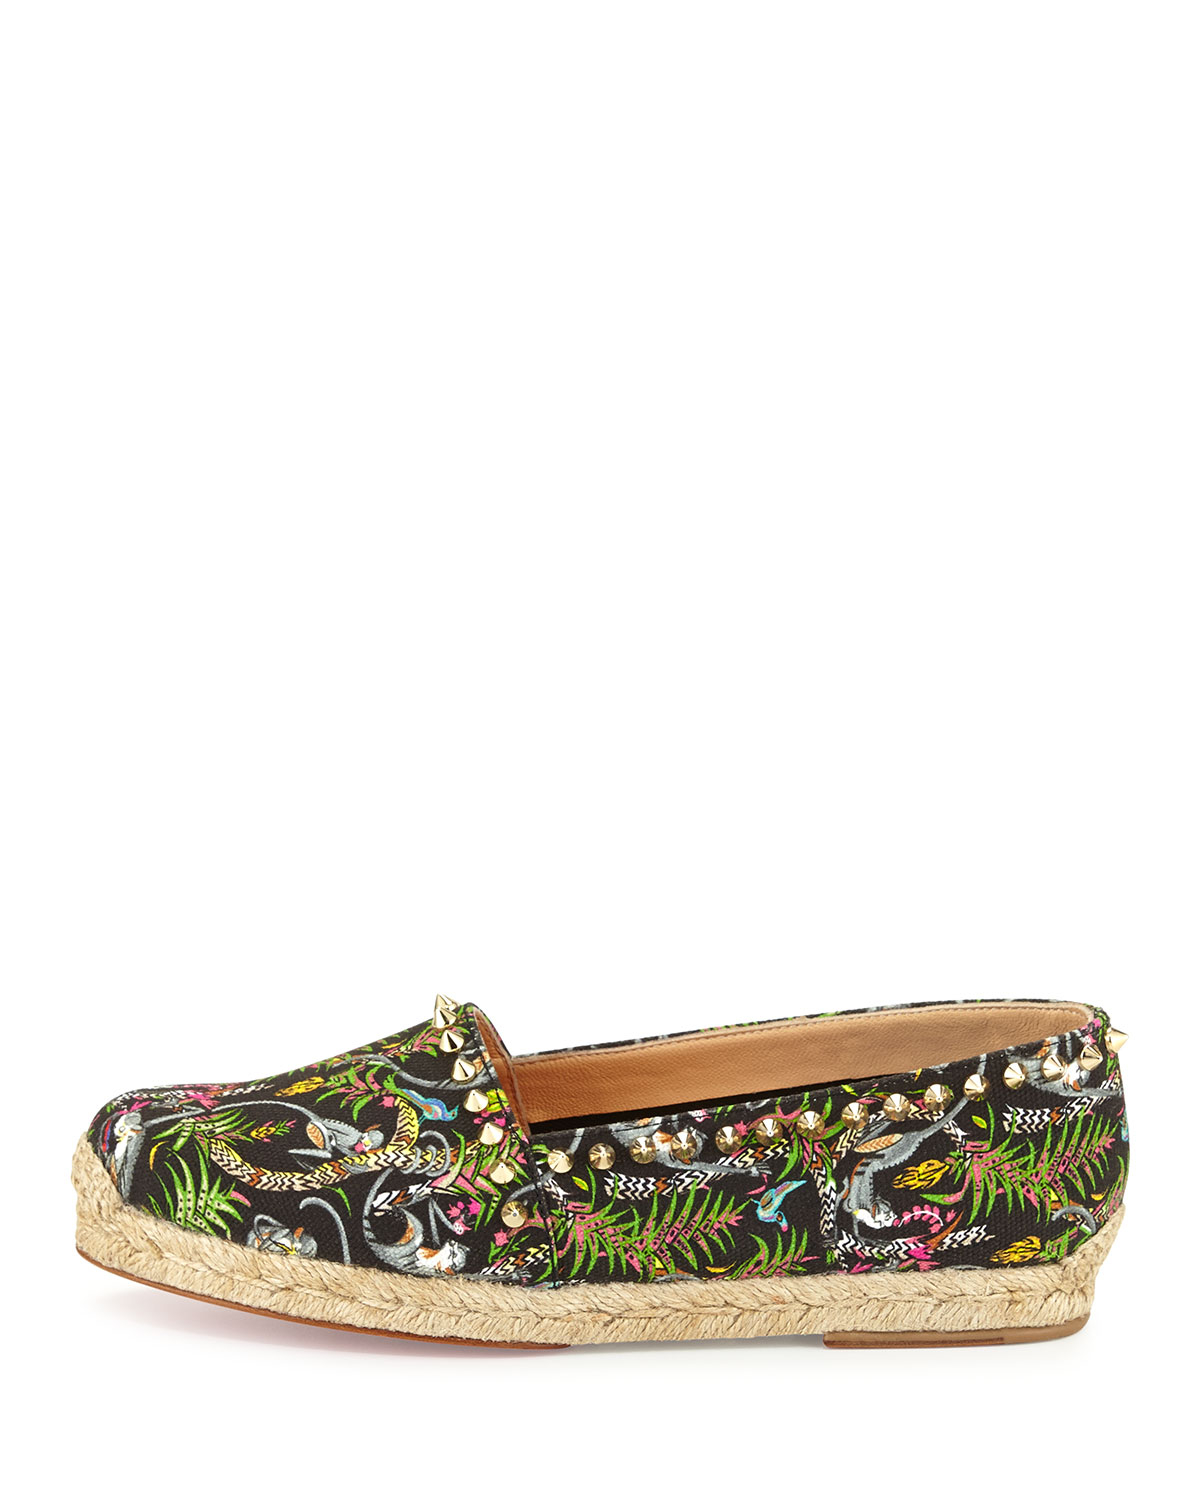 Christian louboutin Ares Canvas Red Sole Espadrille in Brown ...  